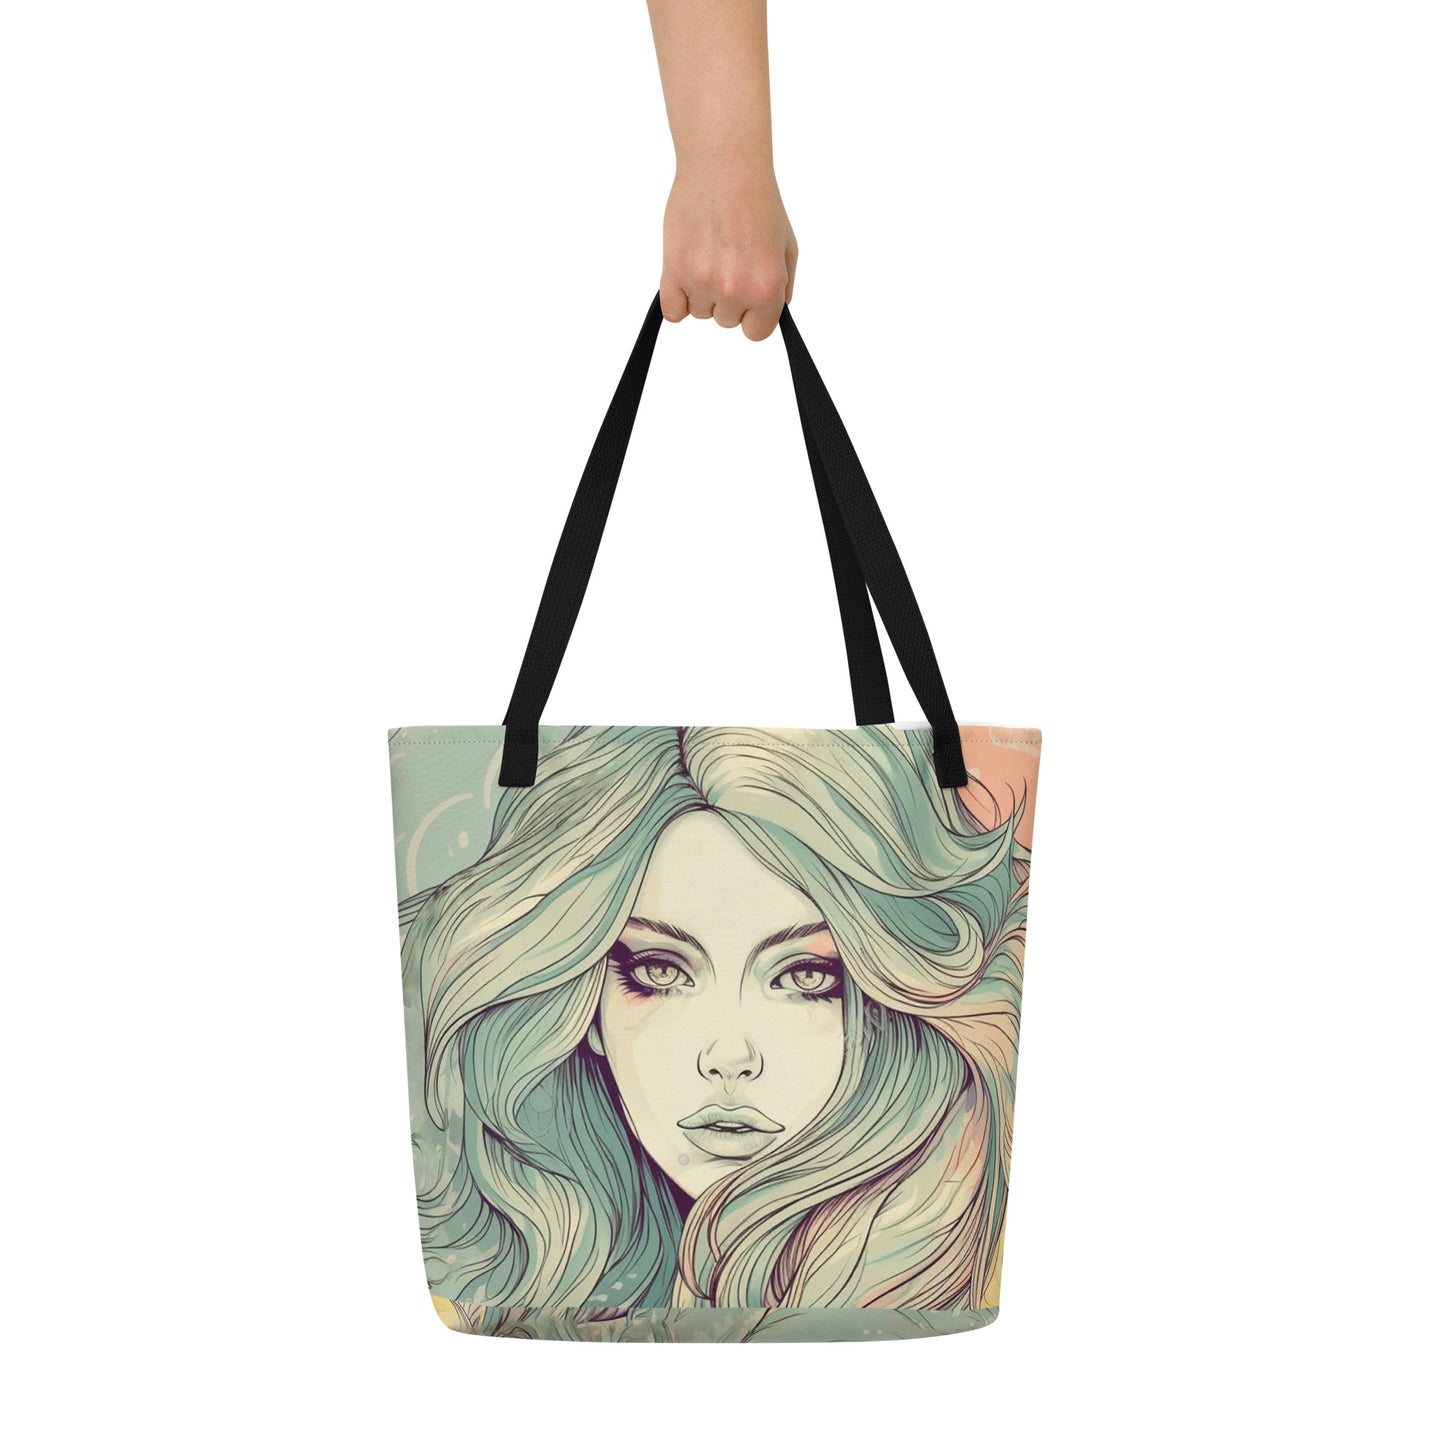 GROOVY 70s GIRL TOTE